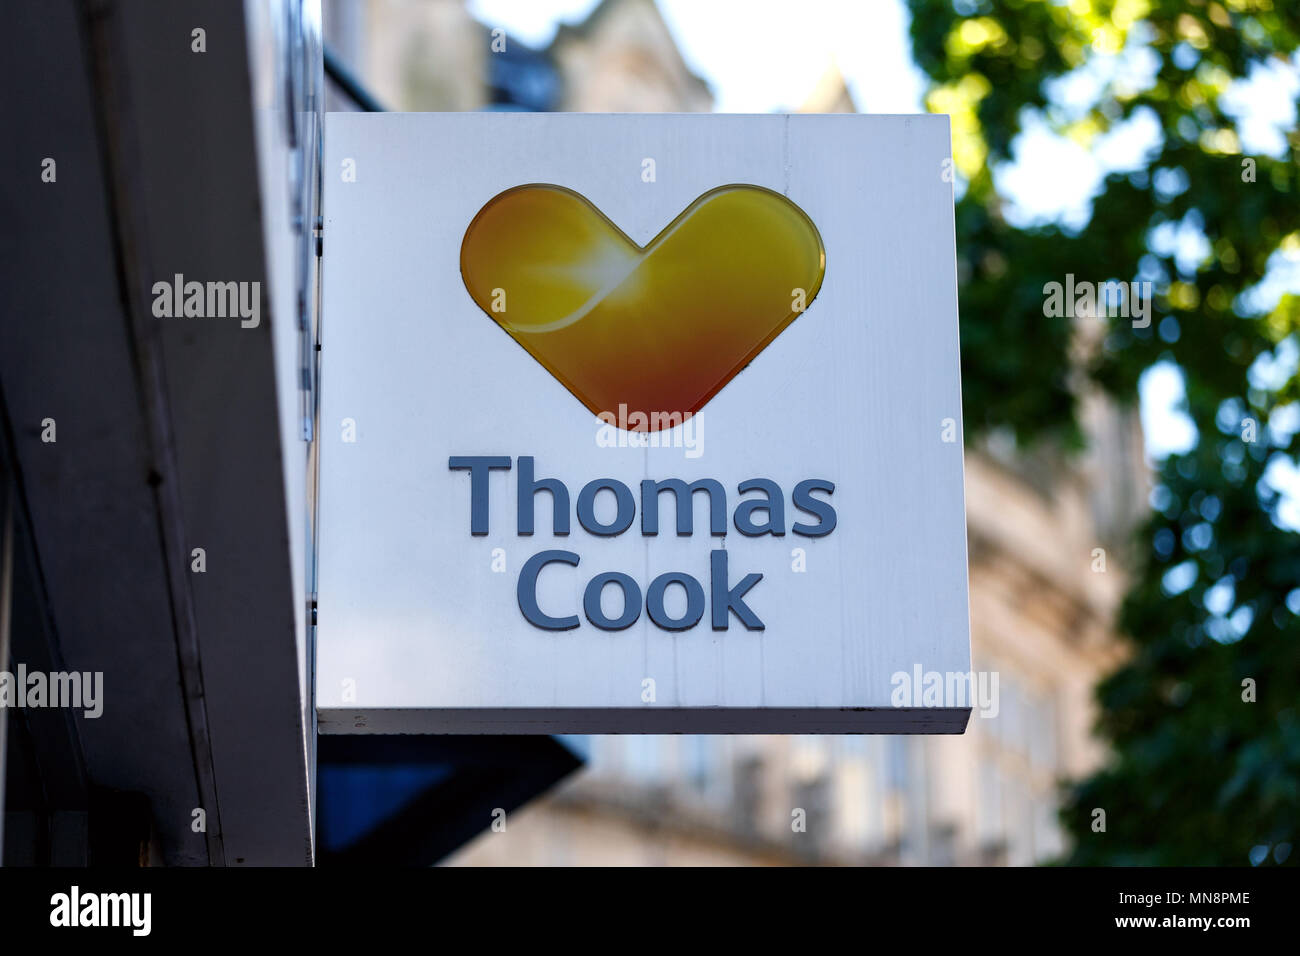 A branch of travel agent Thomas Cook in the United Kingdom / Thomas Cook logo, Thomas Cook sign, Thomas Cook high street. Stock Photo